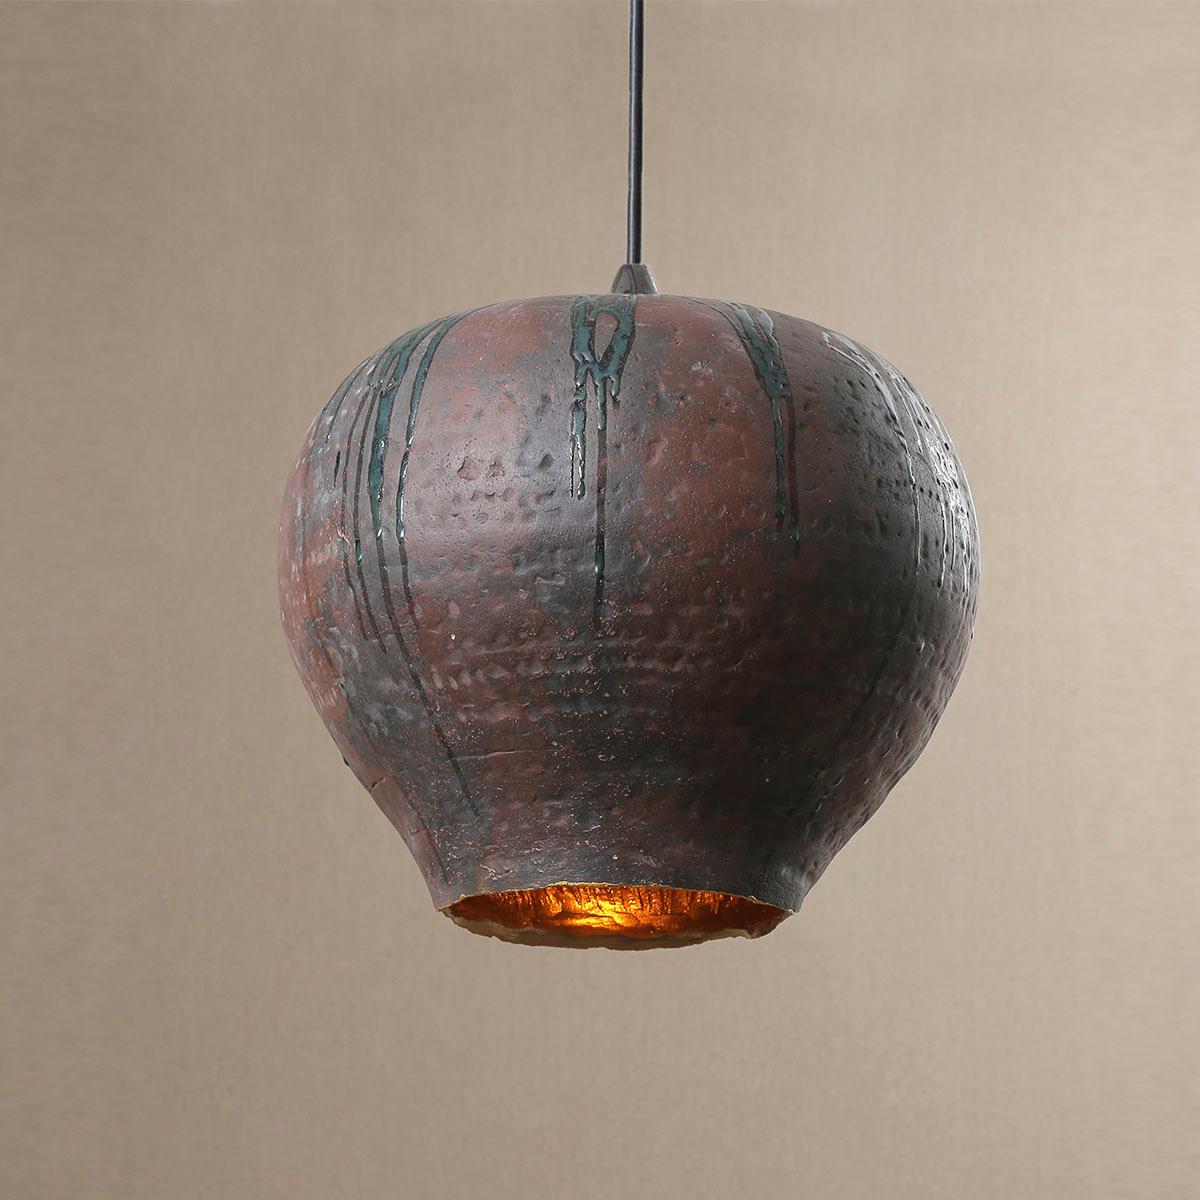 Garlic ceramic pendant lamp by Makhno
Dimensions: D 49 x H 55 cm
Materials: Ceramics

All our lamps can be wired according to each country. If sold to the USA it will be wired for the USA for instance.

Makhno Studio is a workshop of modern